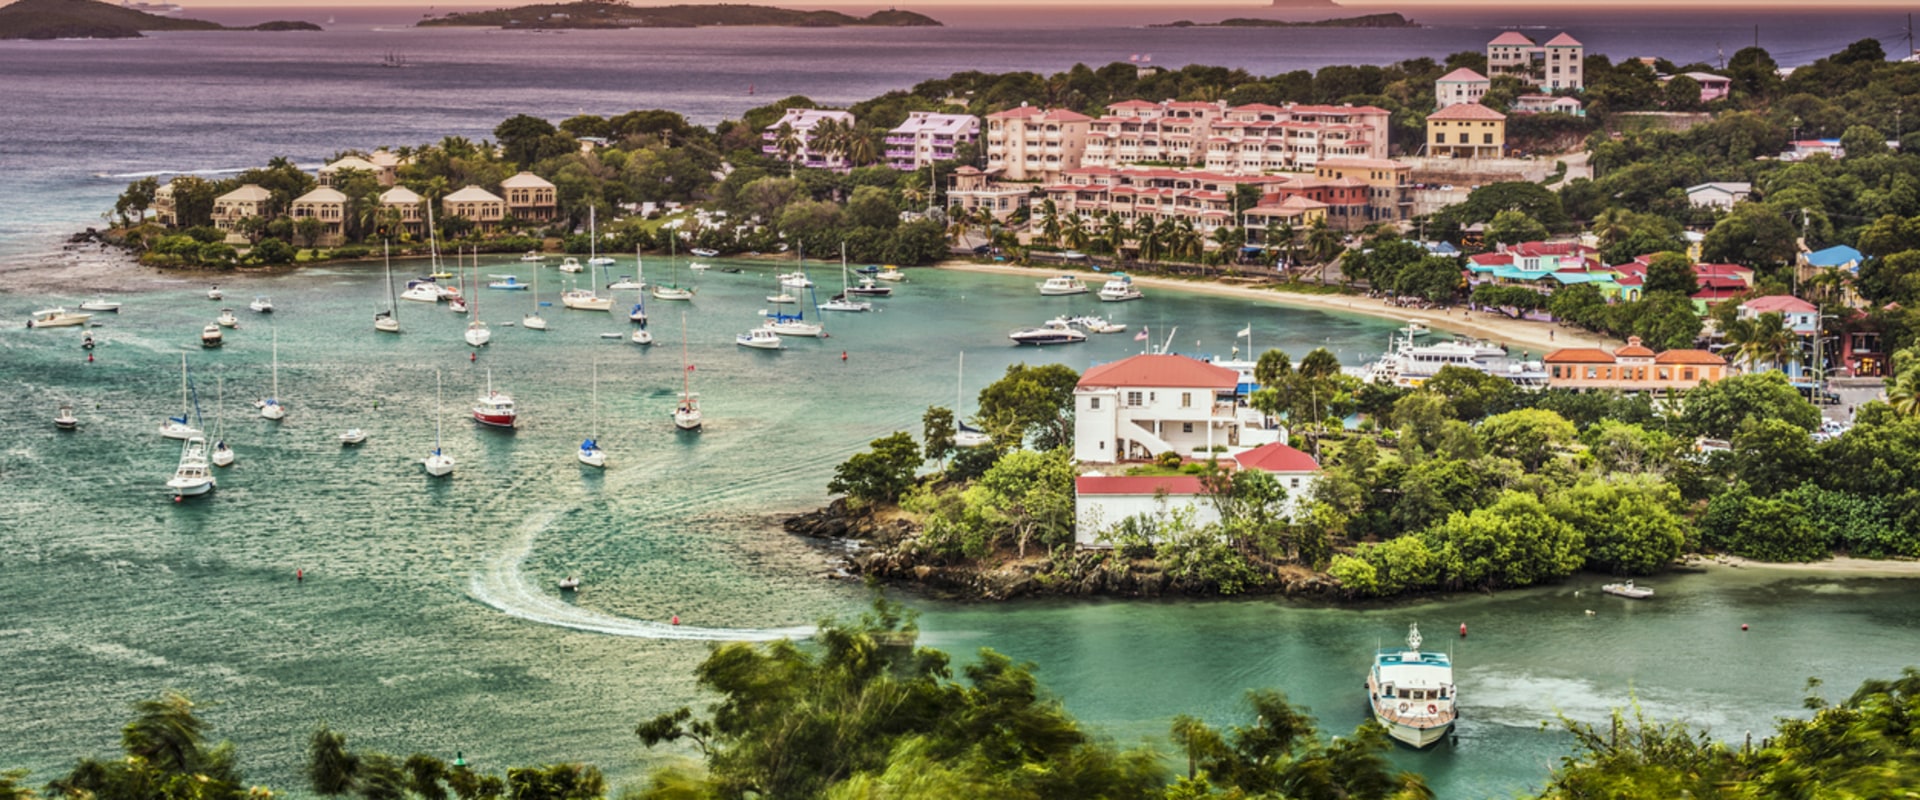 The Easiest US Virgin Island to Fly to